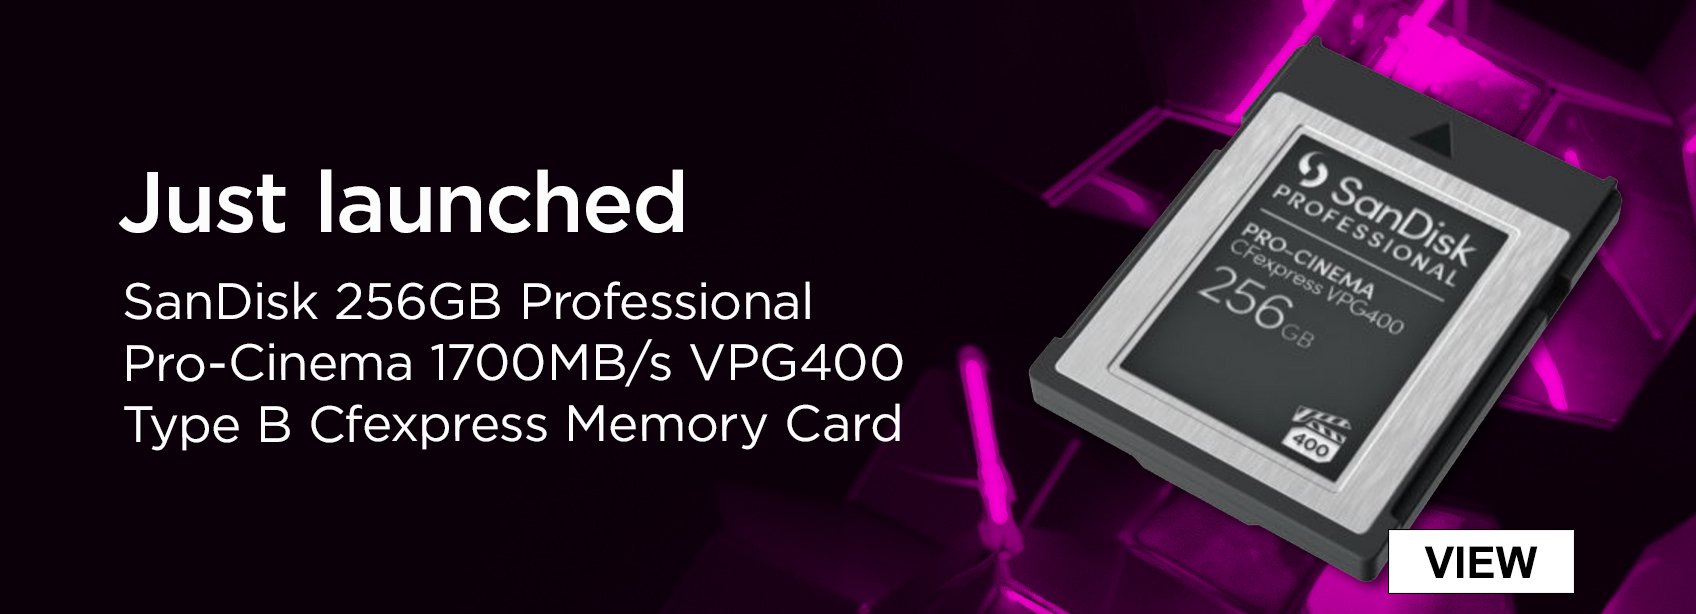 Just Launched. SanDisk 256GB Professional Pro-Cinema 1700MB/s VPG400 Type B Cfexpress Memory Card